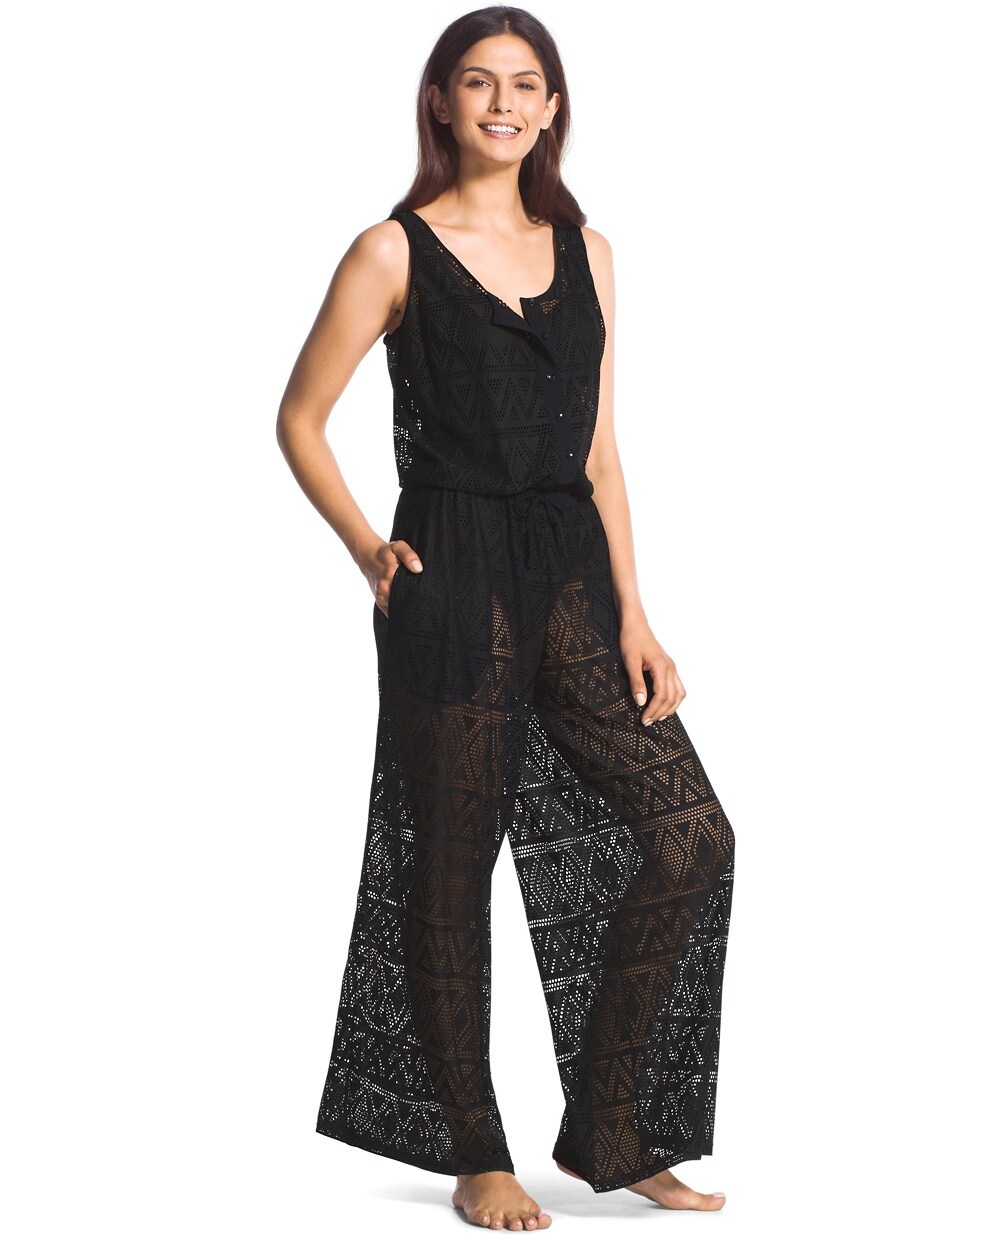 Profile by Gottex Crocheted Jumpsuit Swim Cover Up